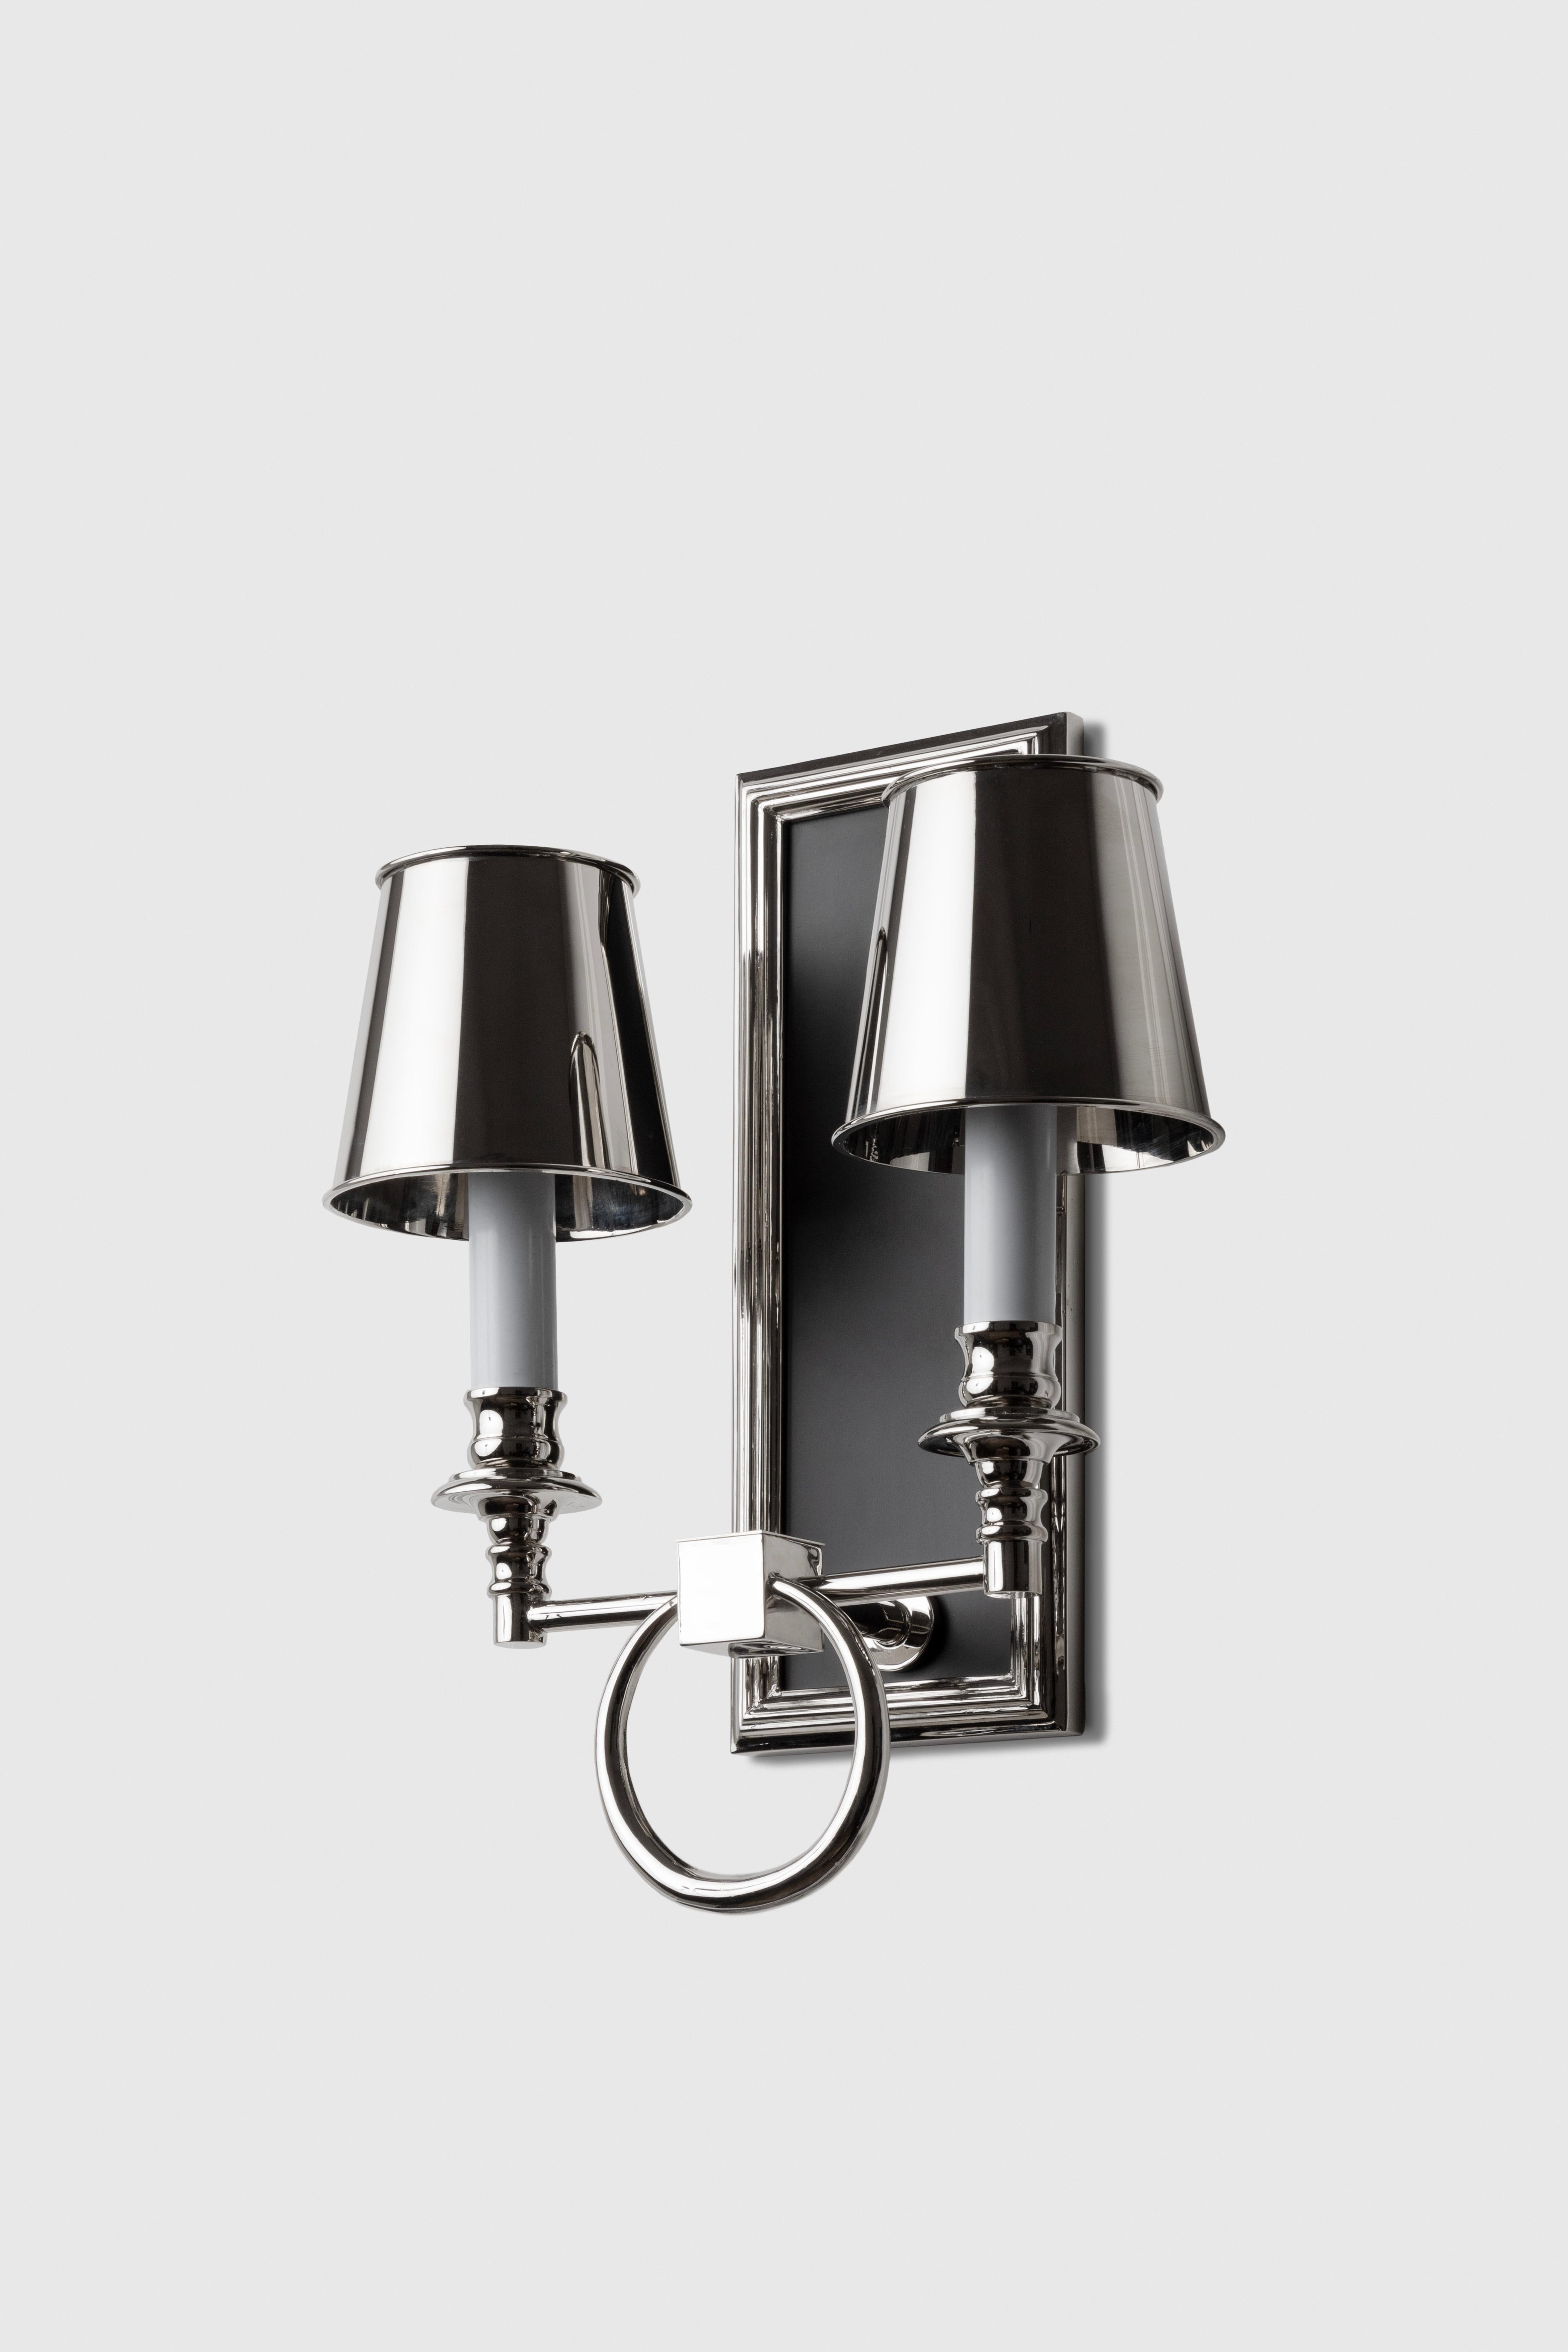 This sconce is made in bronze, with two lights and lampshades in a rectangular frame and with a ring detail in between the lights. 

This piece was designed by Fernanda Loyzaga at the end of 2023. We always abide by the harmonic proportions. The